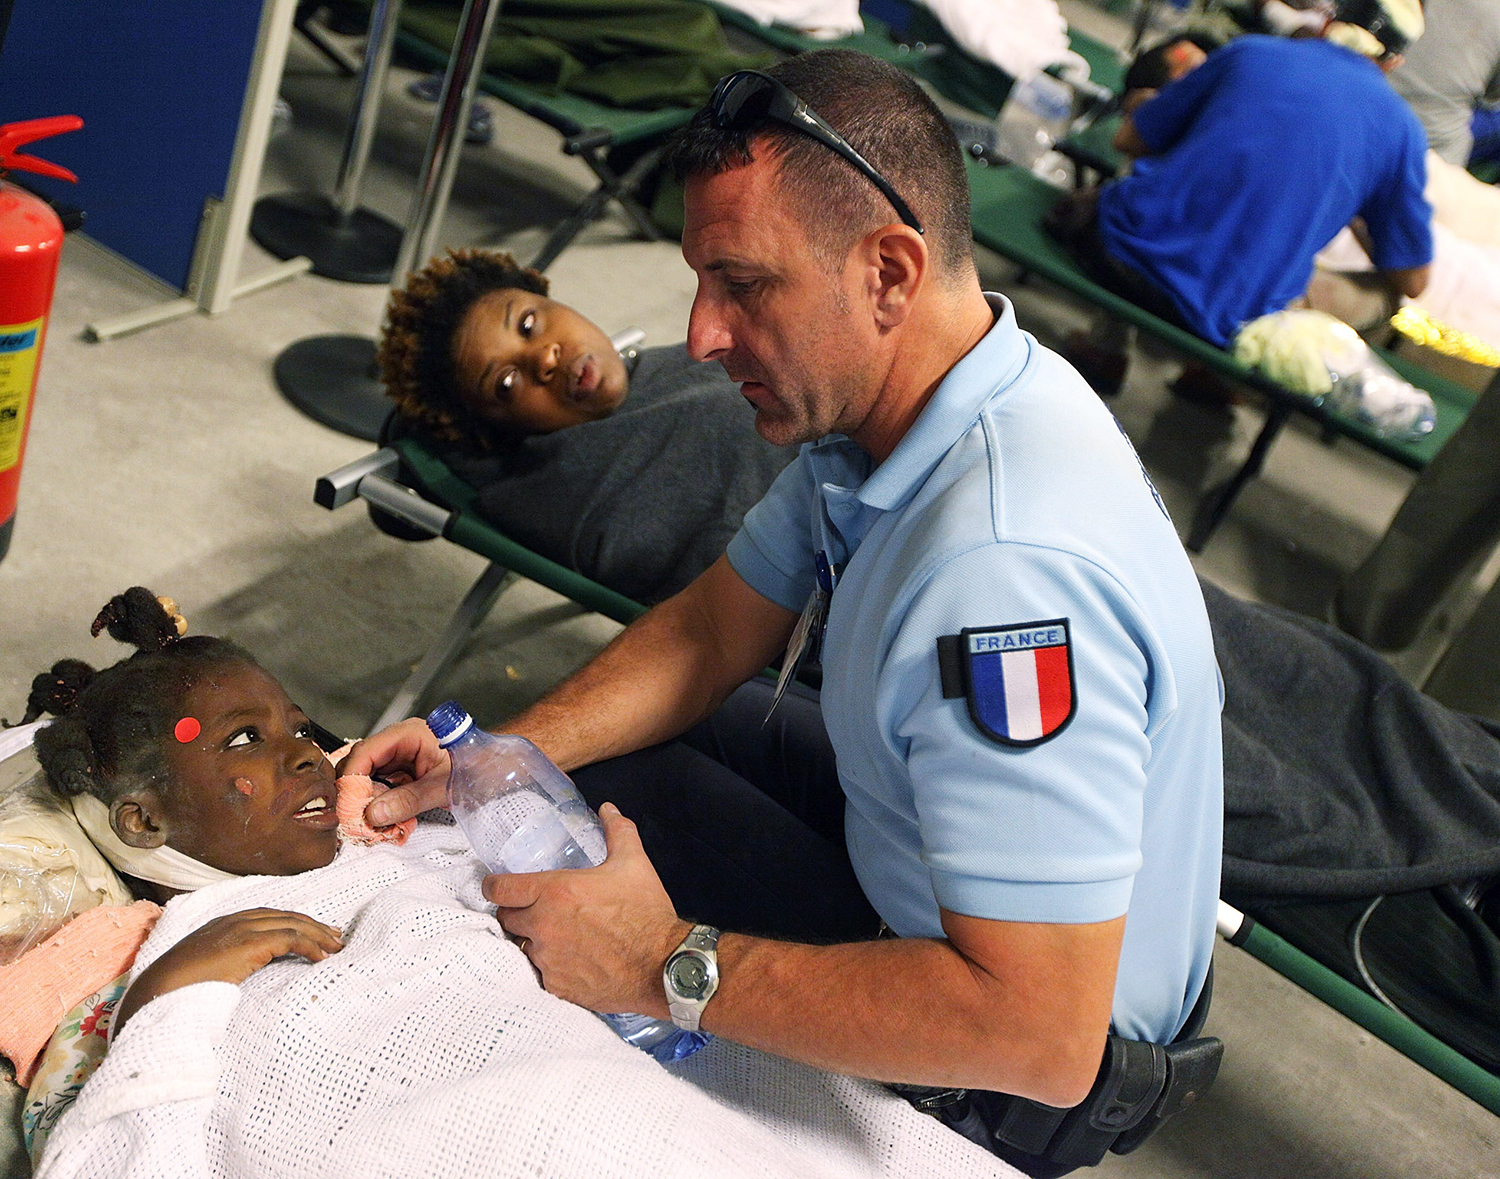 Photo of aid worker helping girl in Port-au-Prince, Haiti, on January 13, 2010.